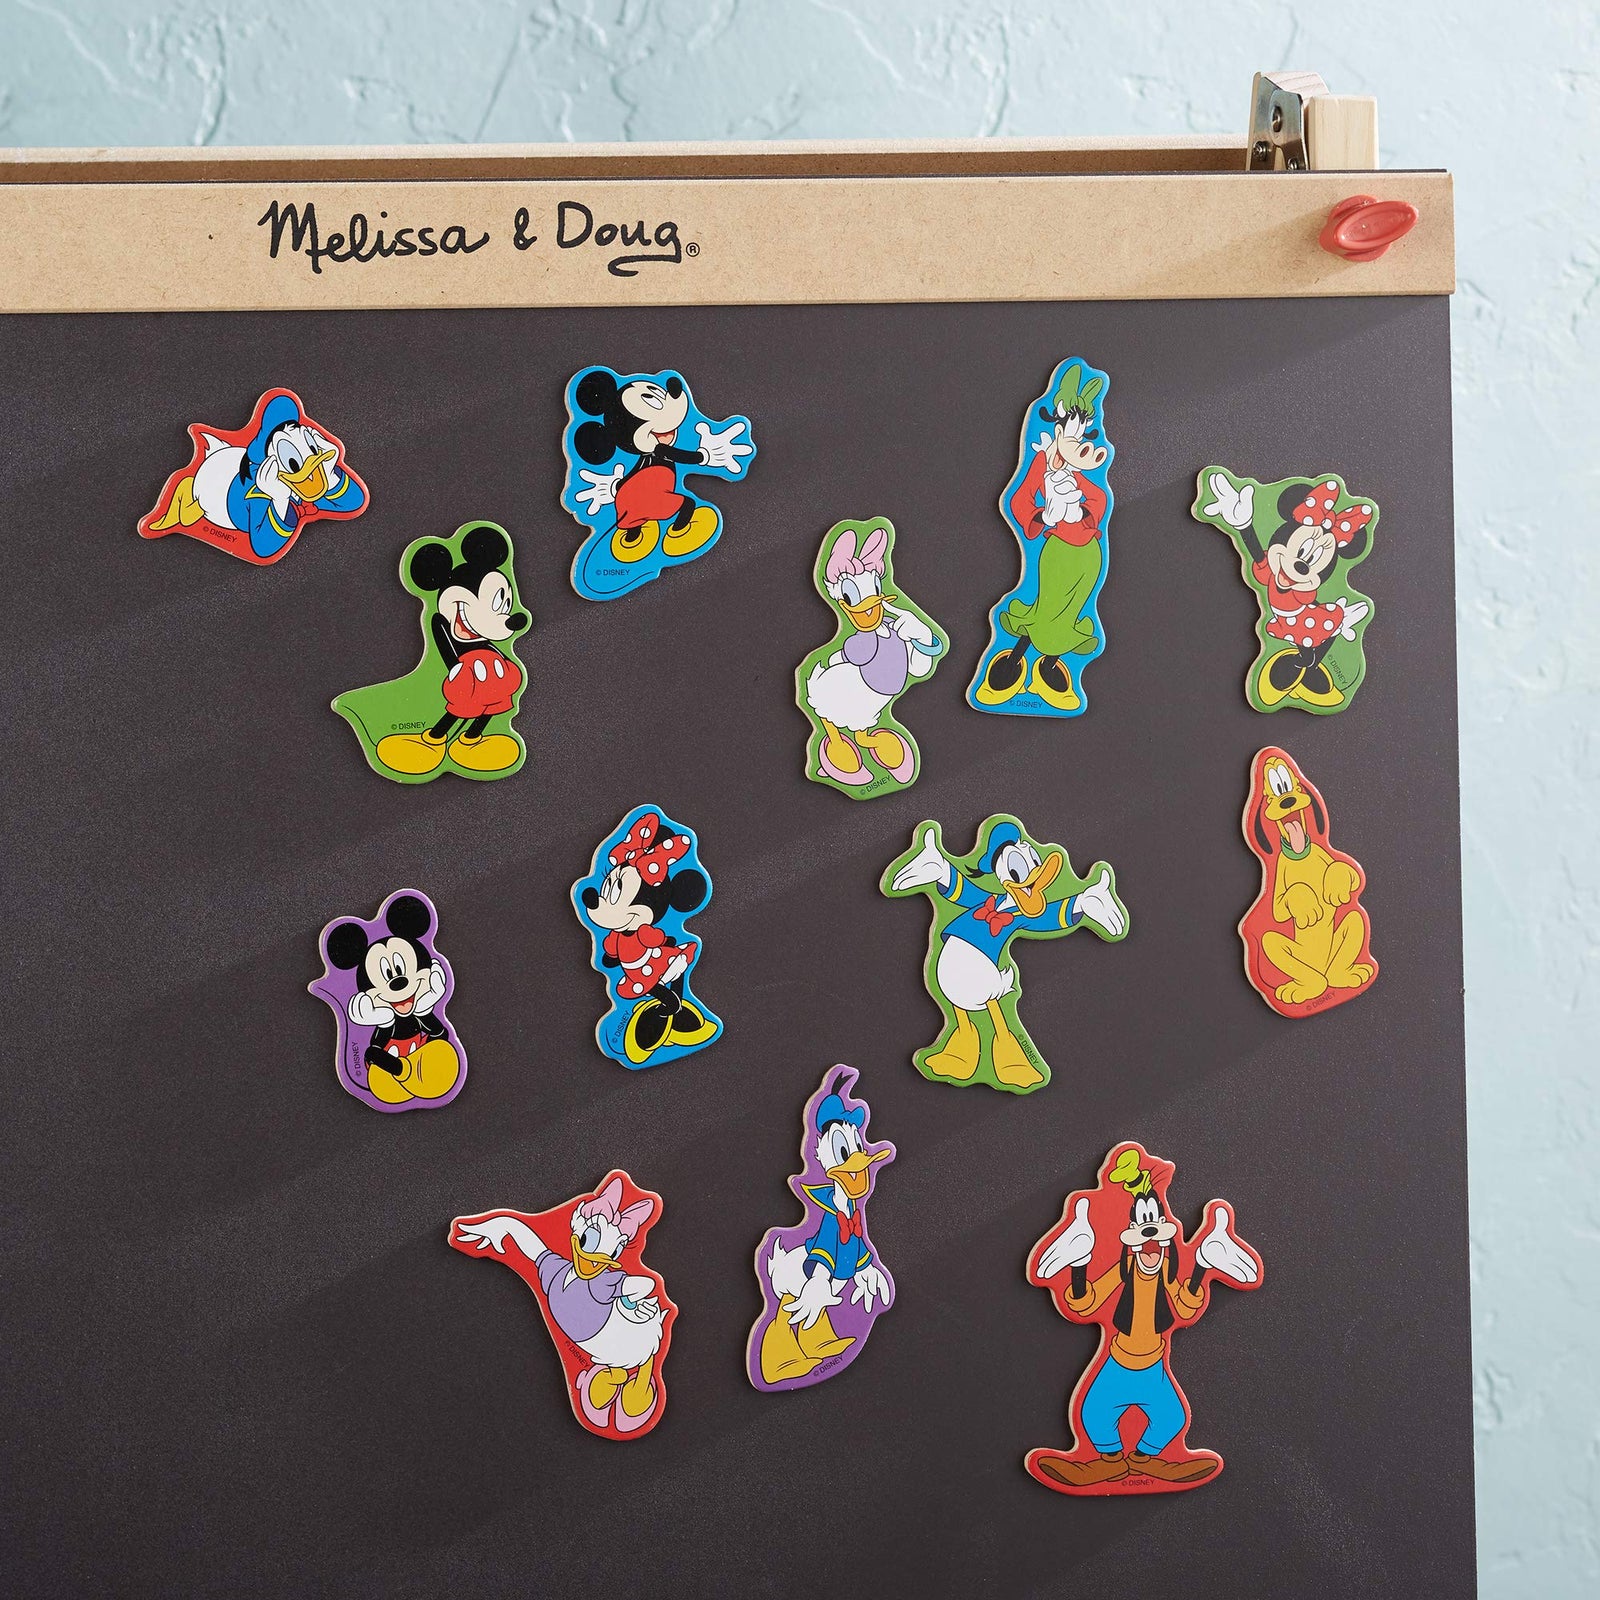 Melissa & Doug Disney Mickey Mouse Clubhouse Wooden Character Magnets (20 pcs)